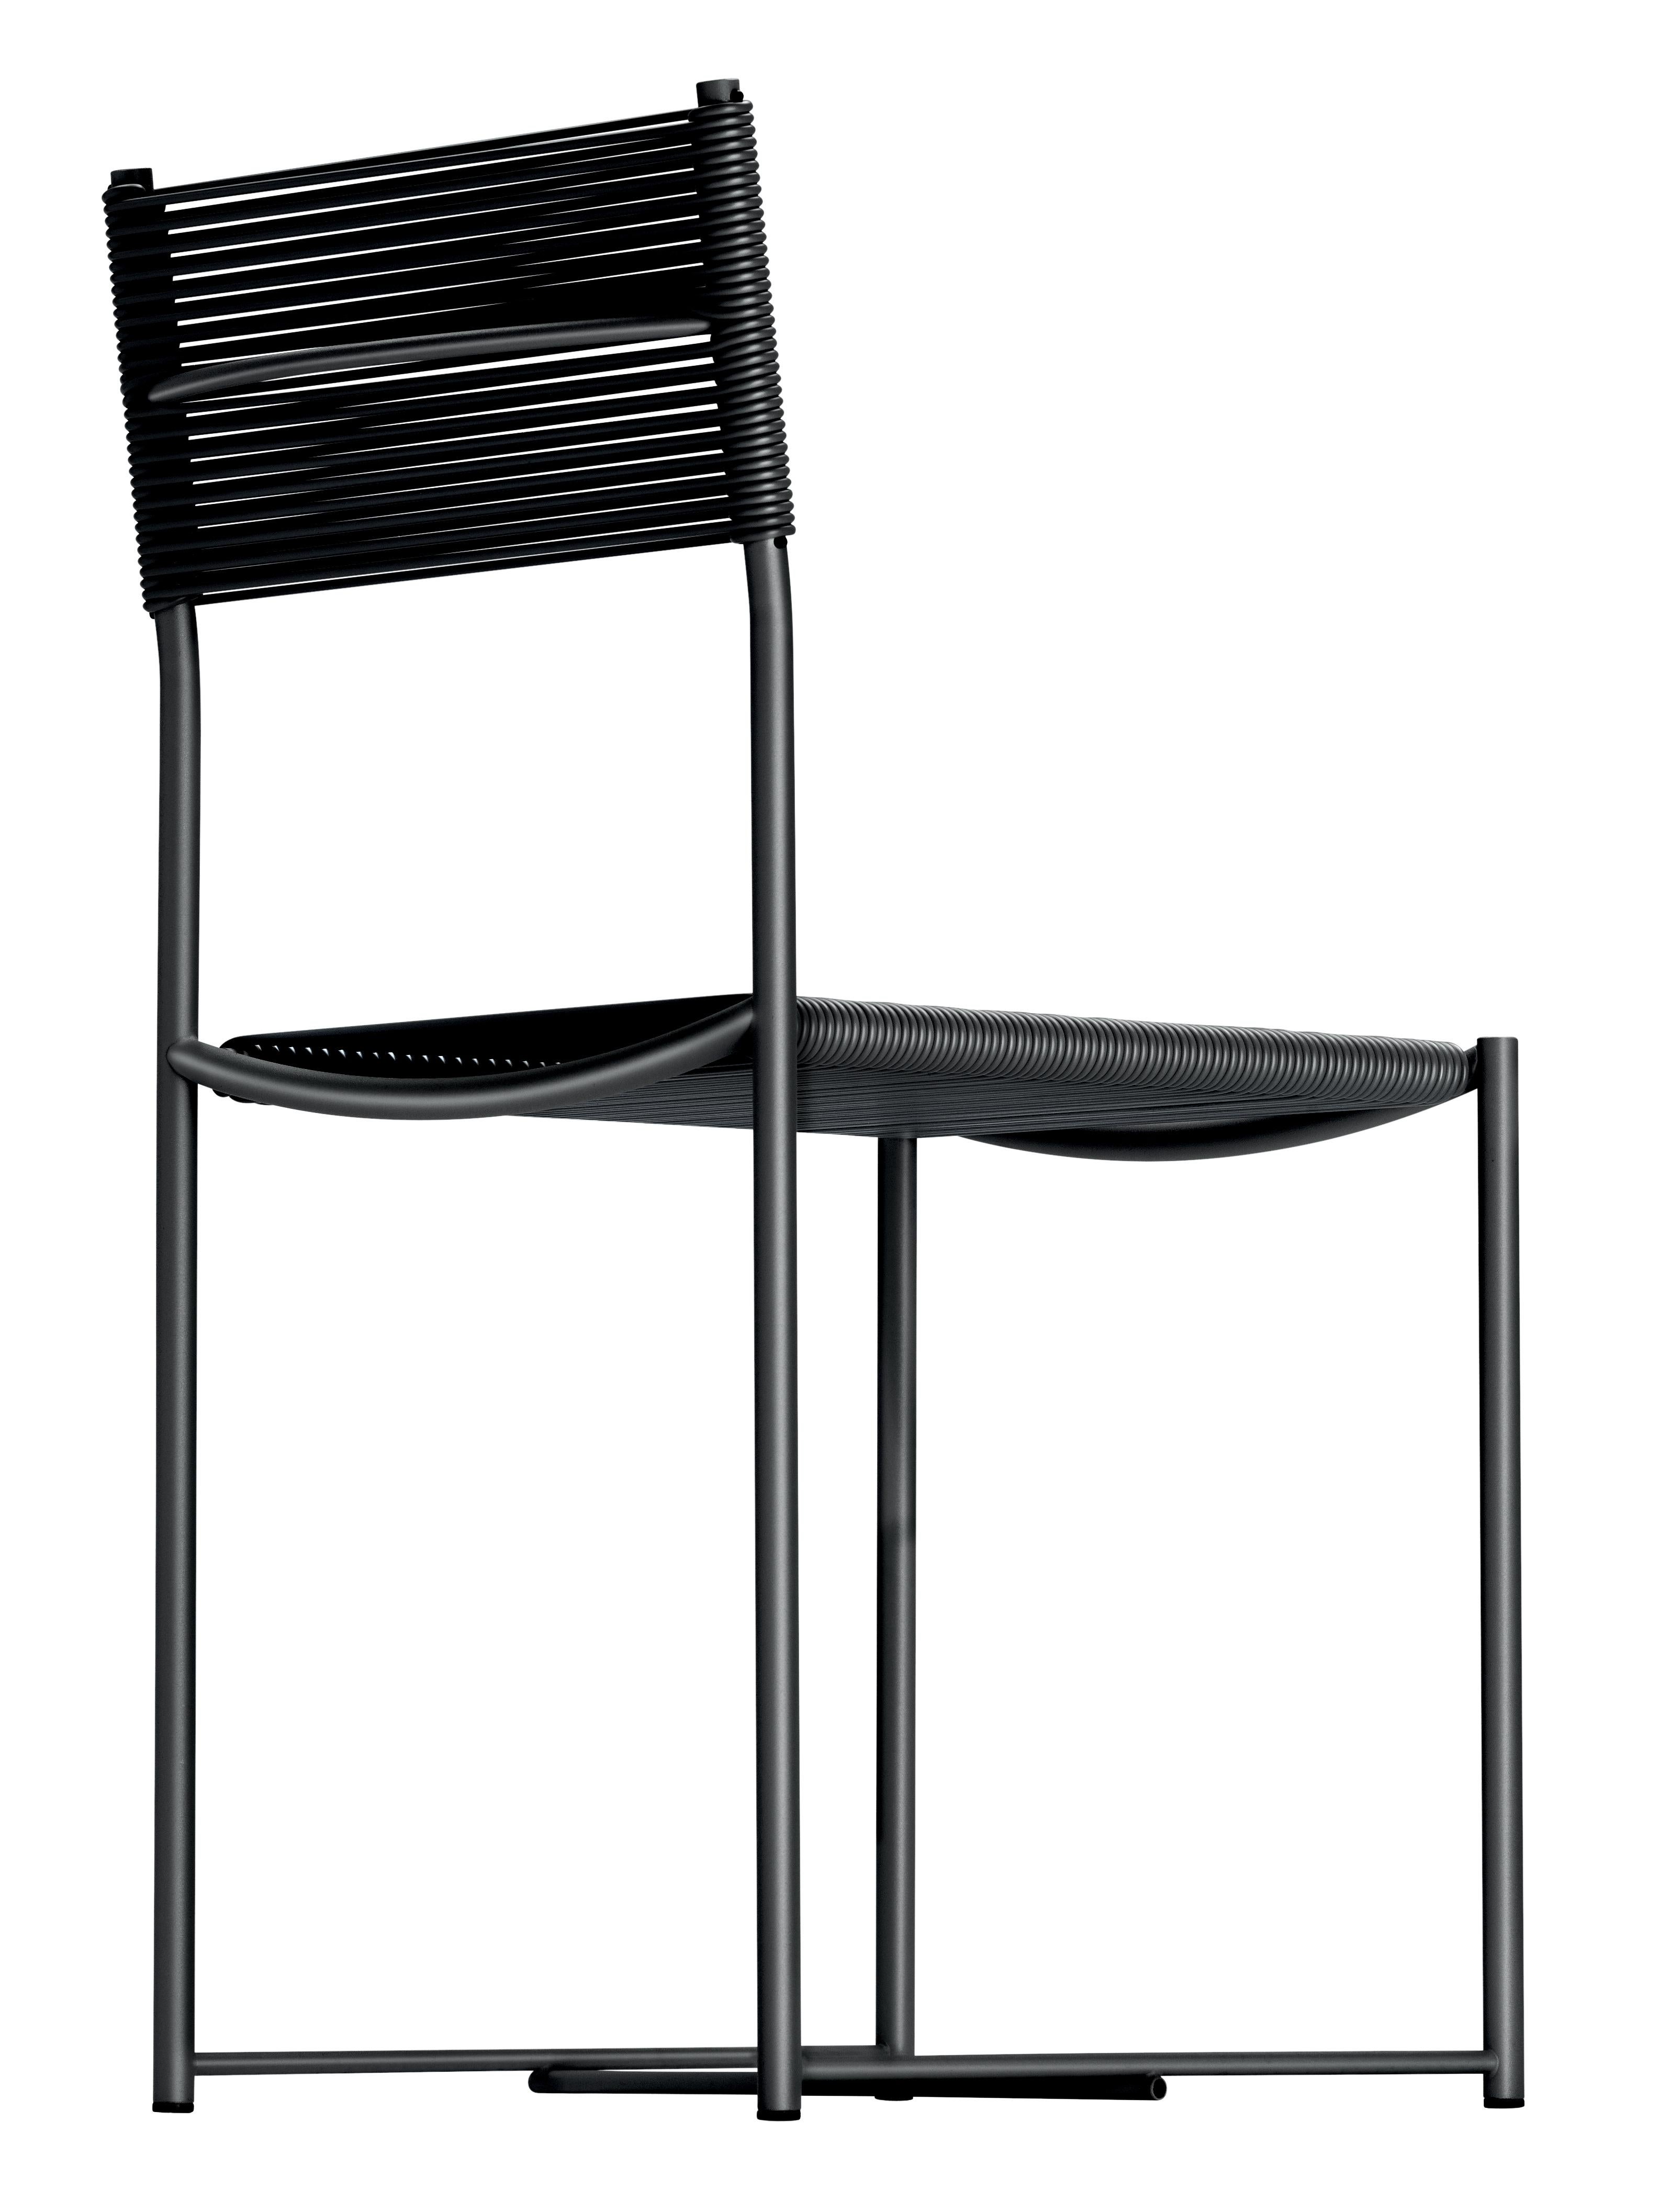 Alias 101 Spaghetti Chair with Black PVC Seat and Black Lacquered Steel Frame by Giandomenico Belotti

Chair with structure in chromed or lacquered steel, seat and back in PVC.

(1922-2004) After graduating in architecture from the University of